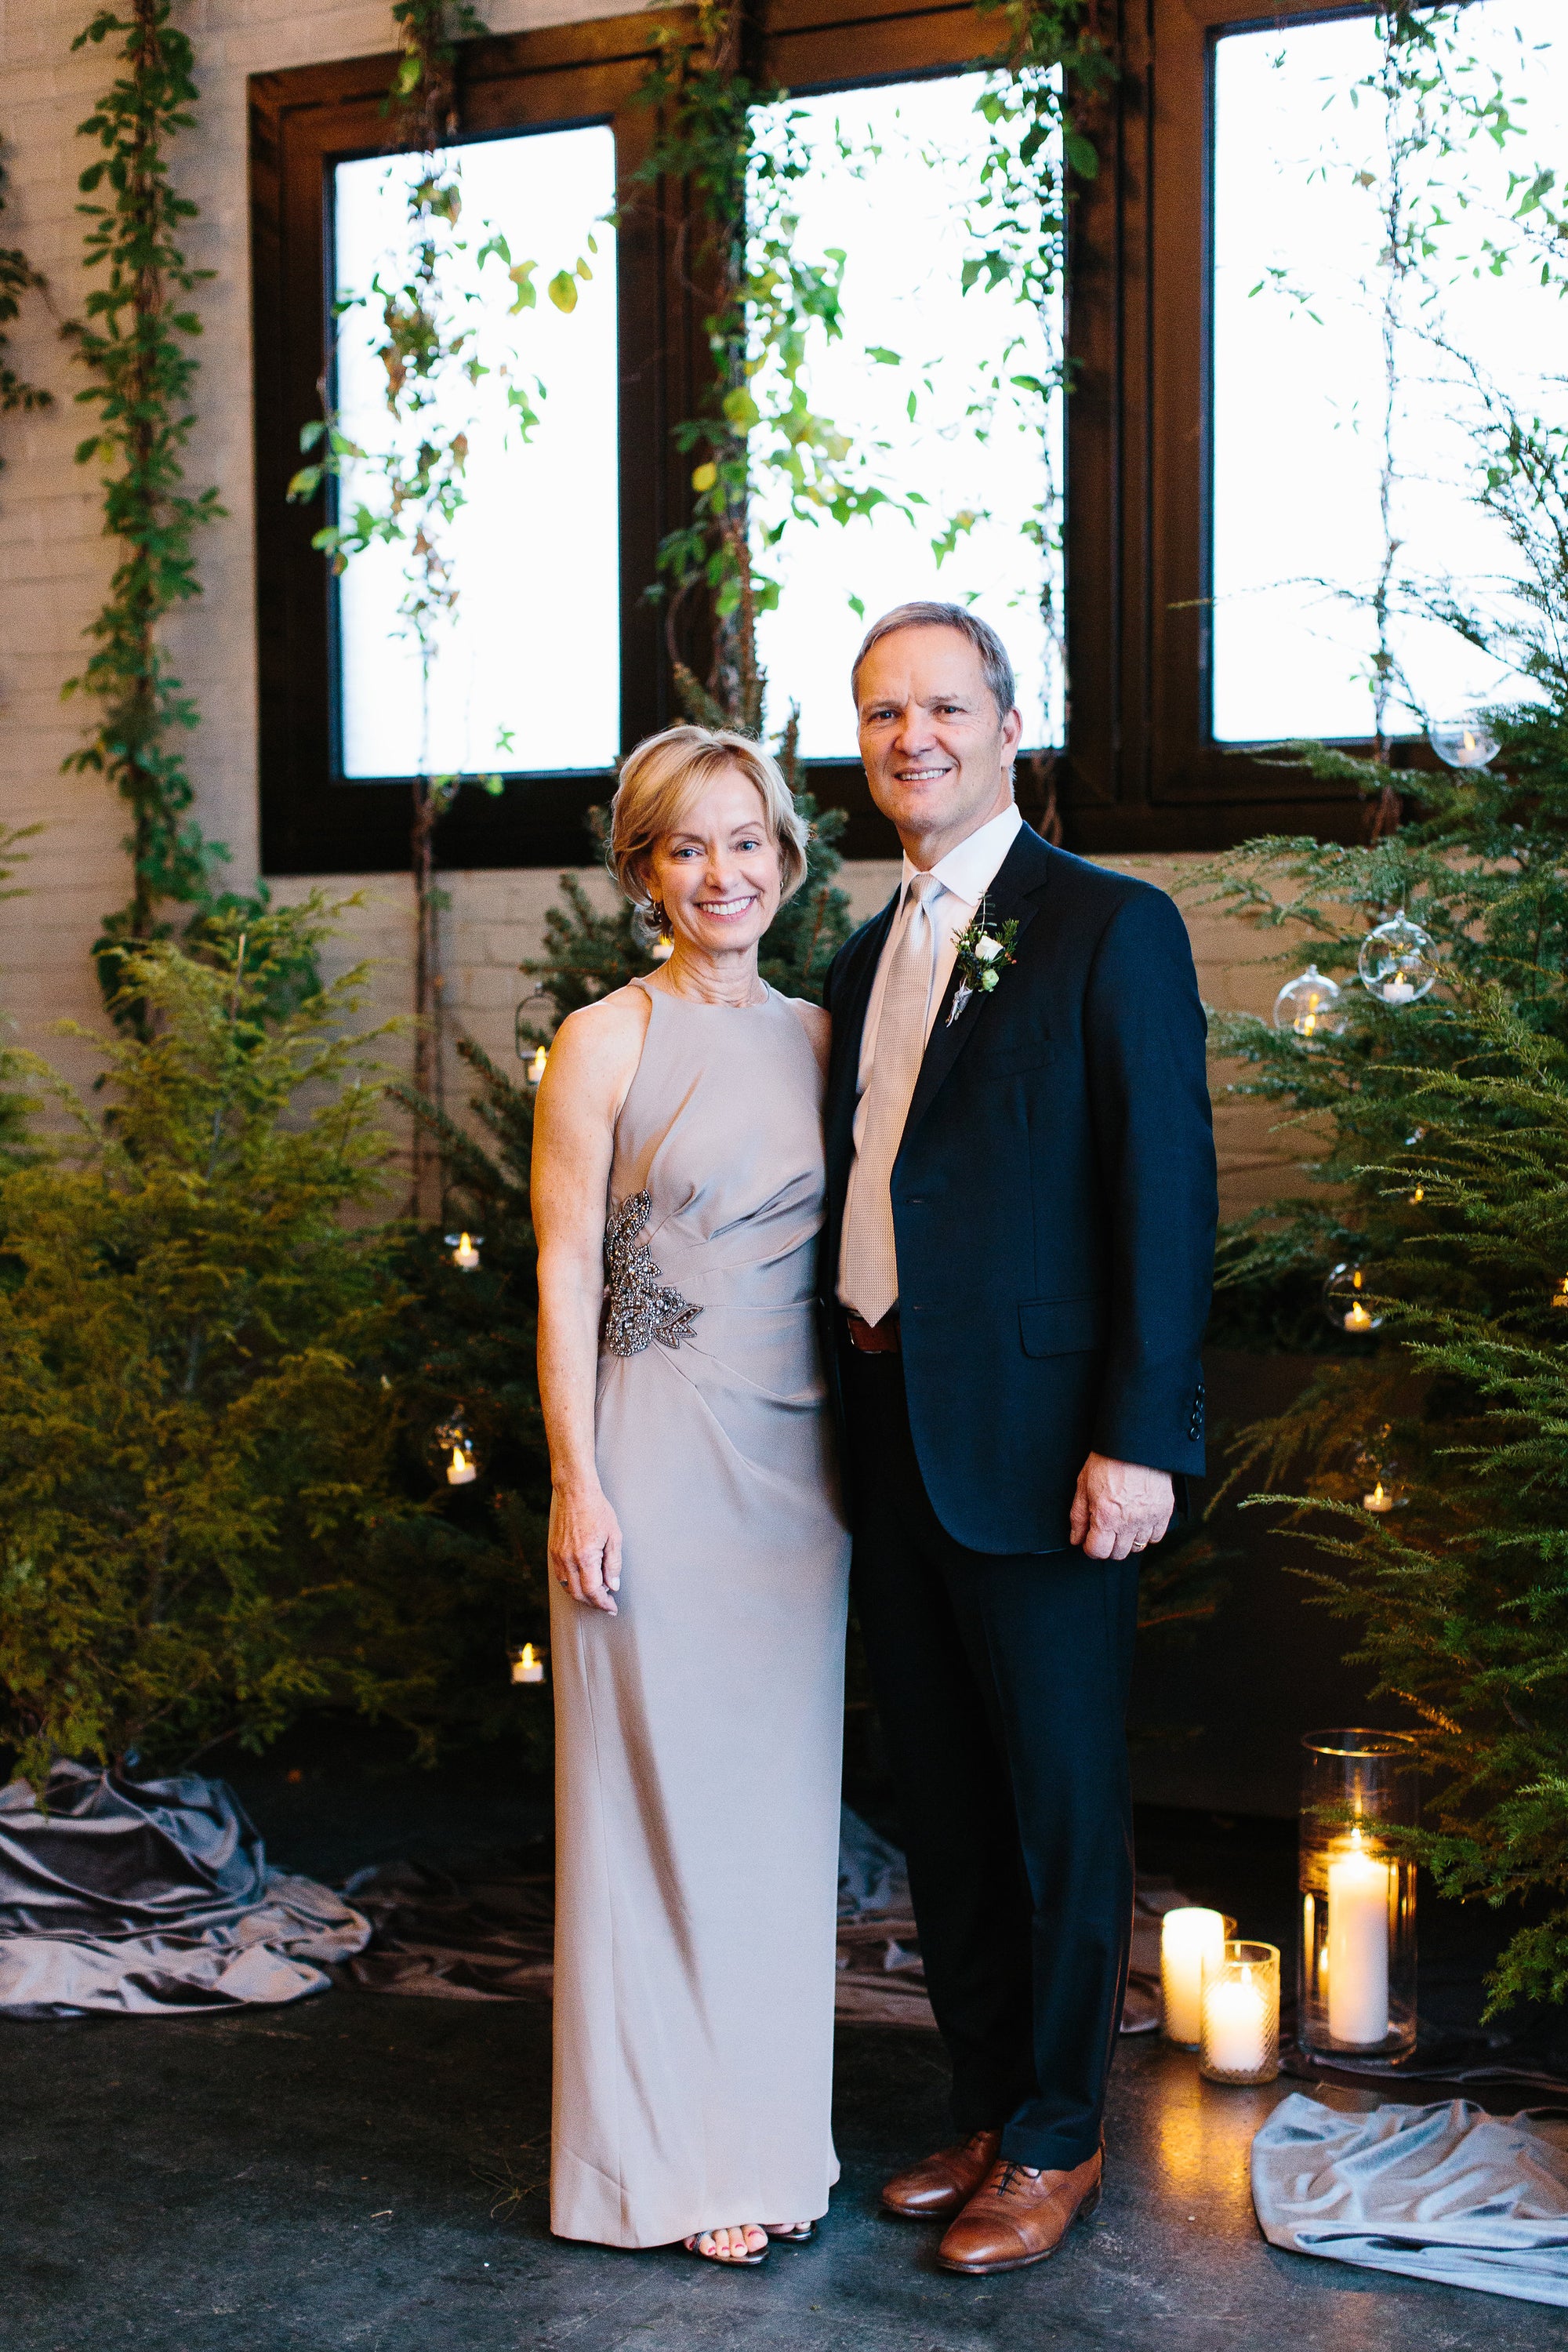 Pam Lamp wearing a custom designed taupe mother of the bride gown cinched at the side at her son's wedding in Brooklyn, New York.